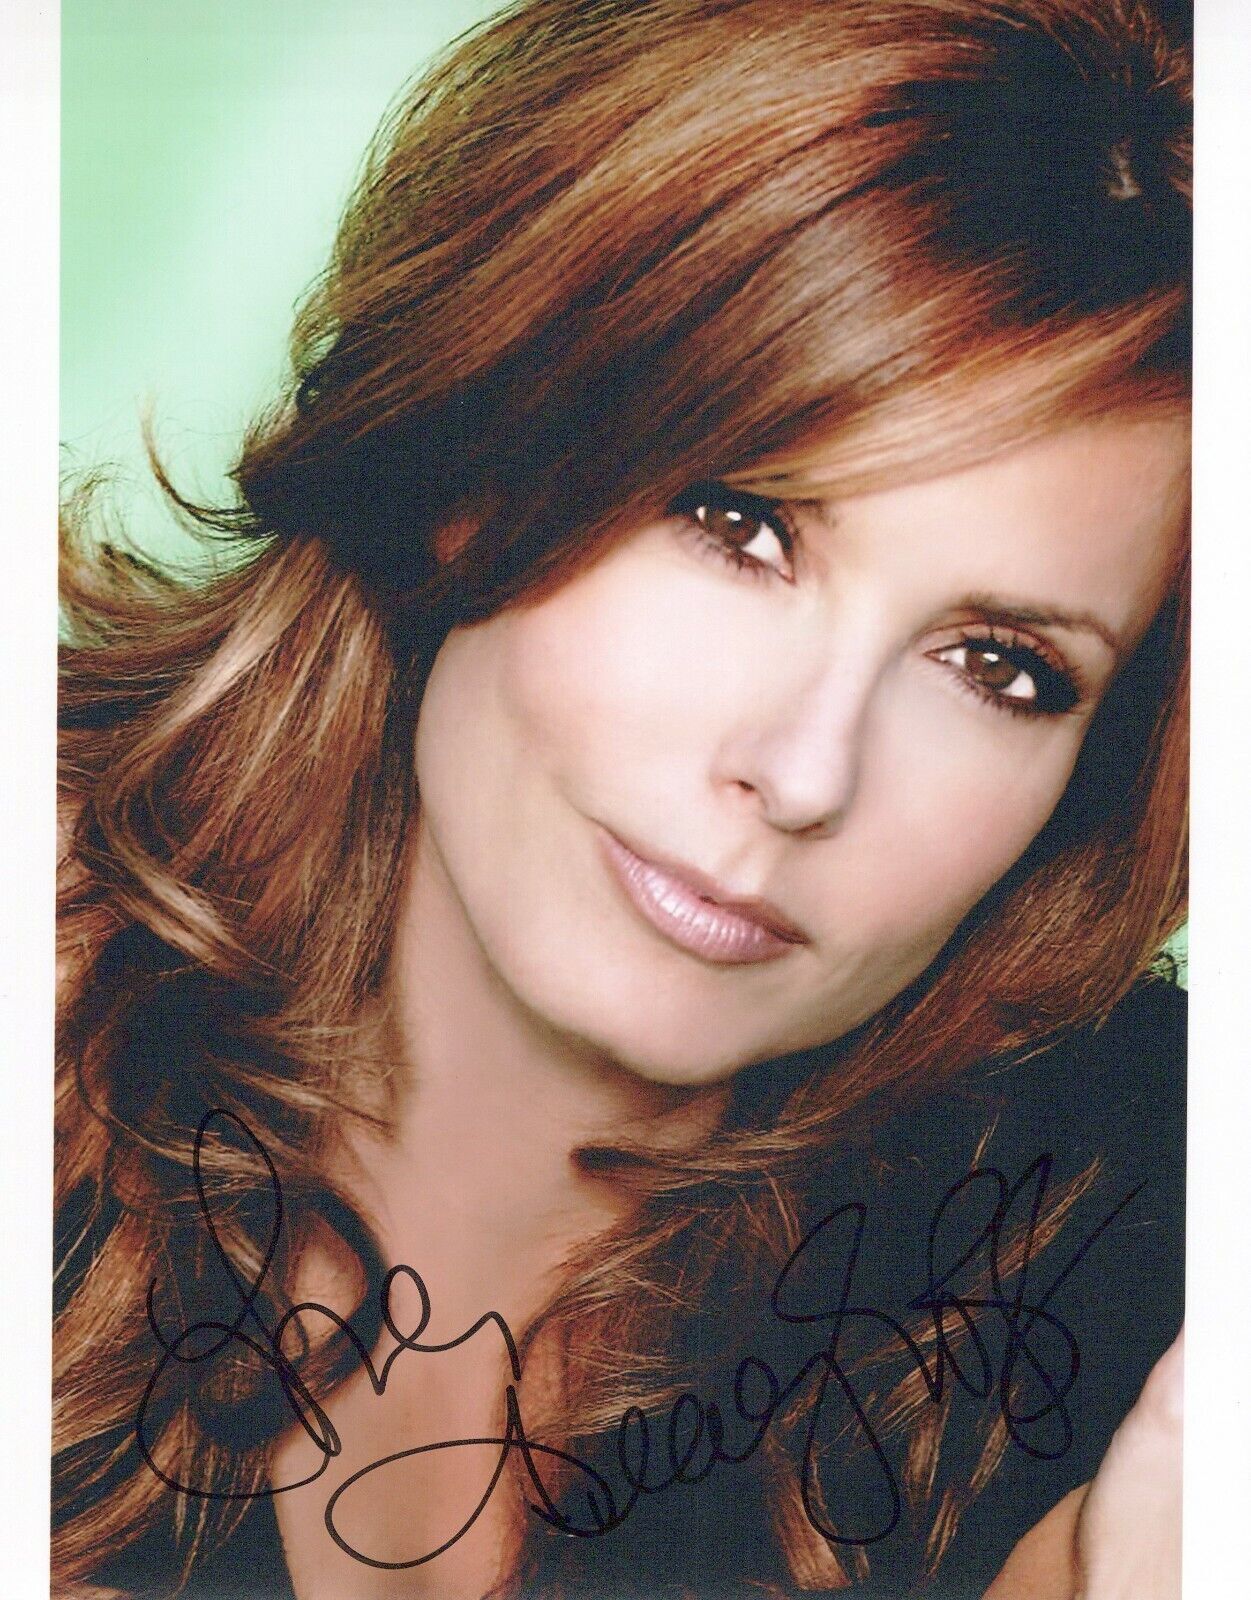 Tracey E Bregman glamour shot autographed Photo Poster painting signed 8x10 #14